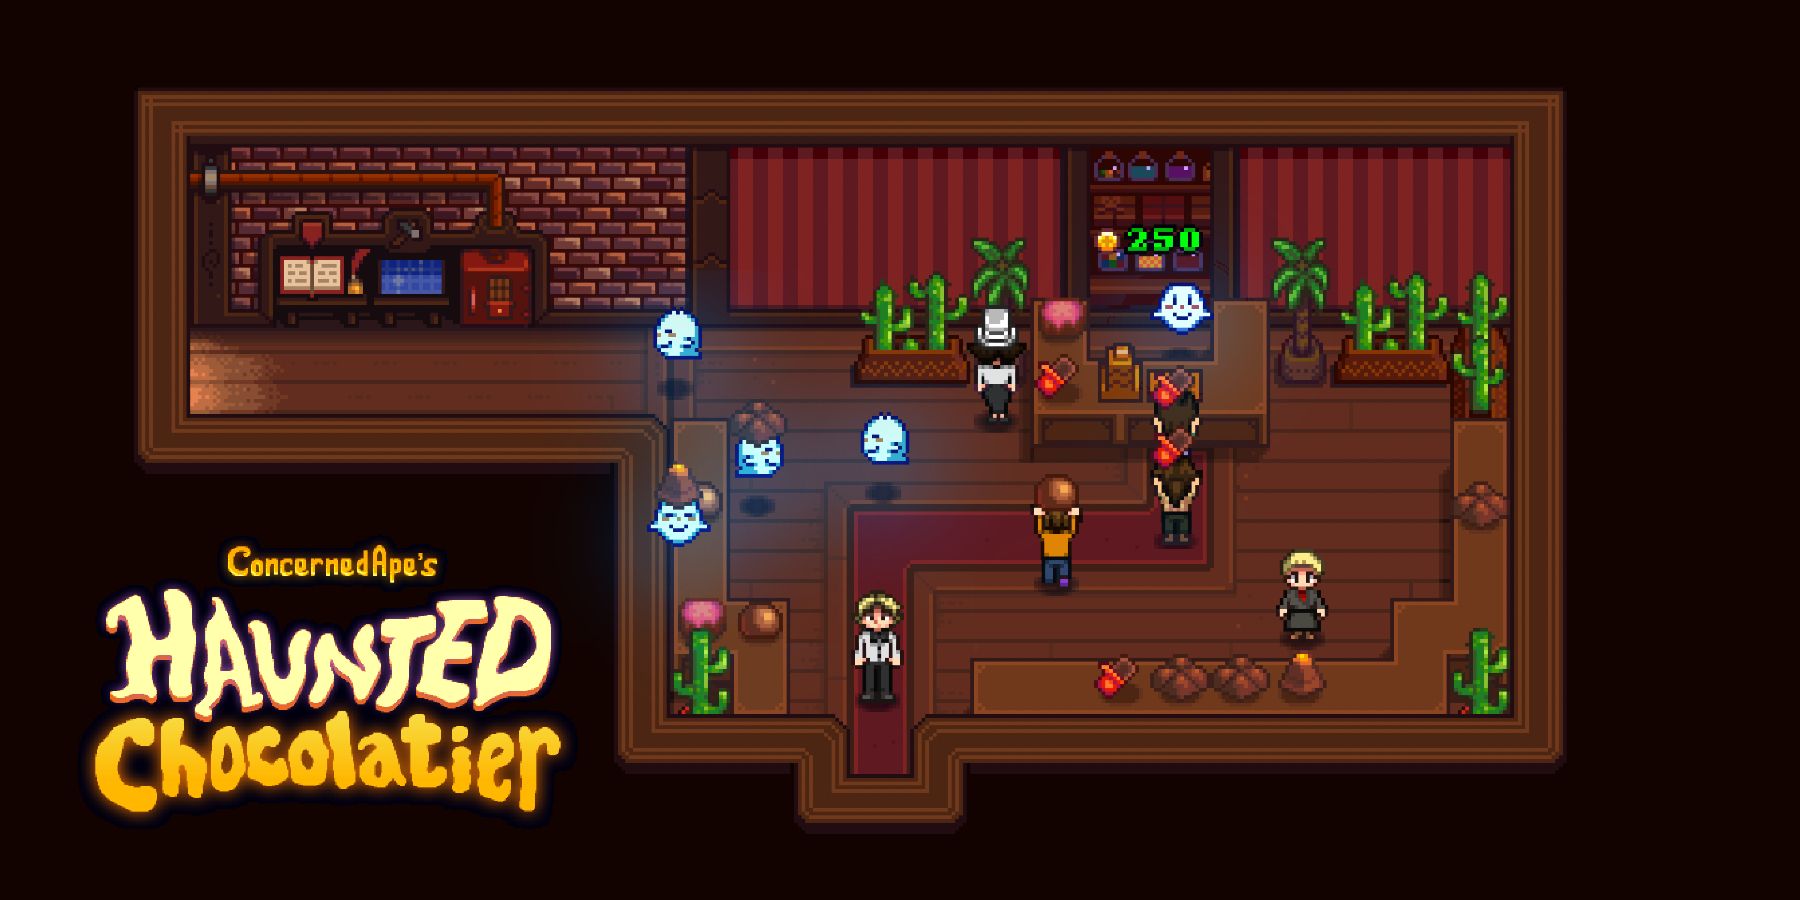 concernedape stardew valley new game reveal